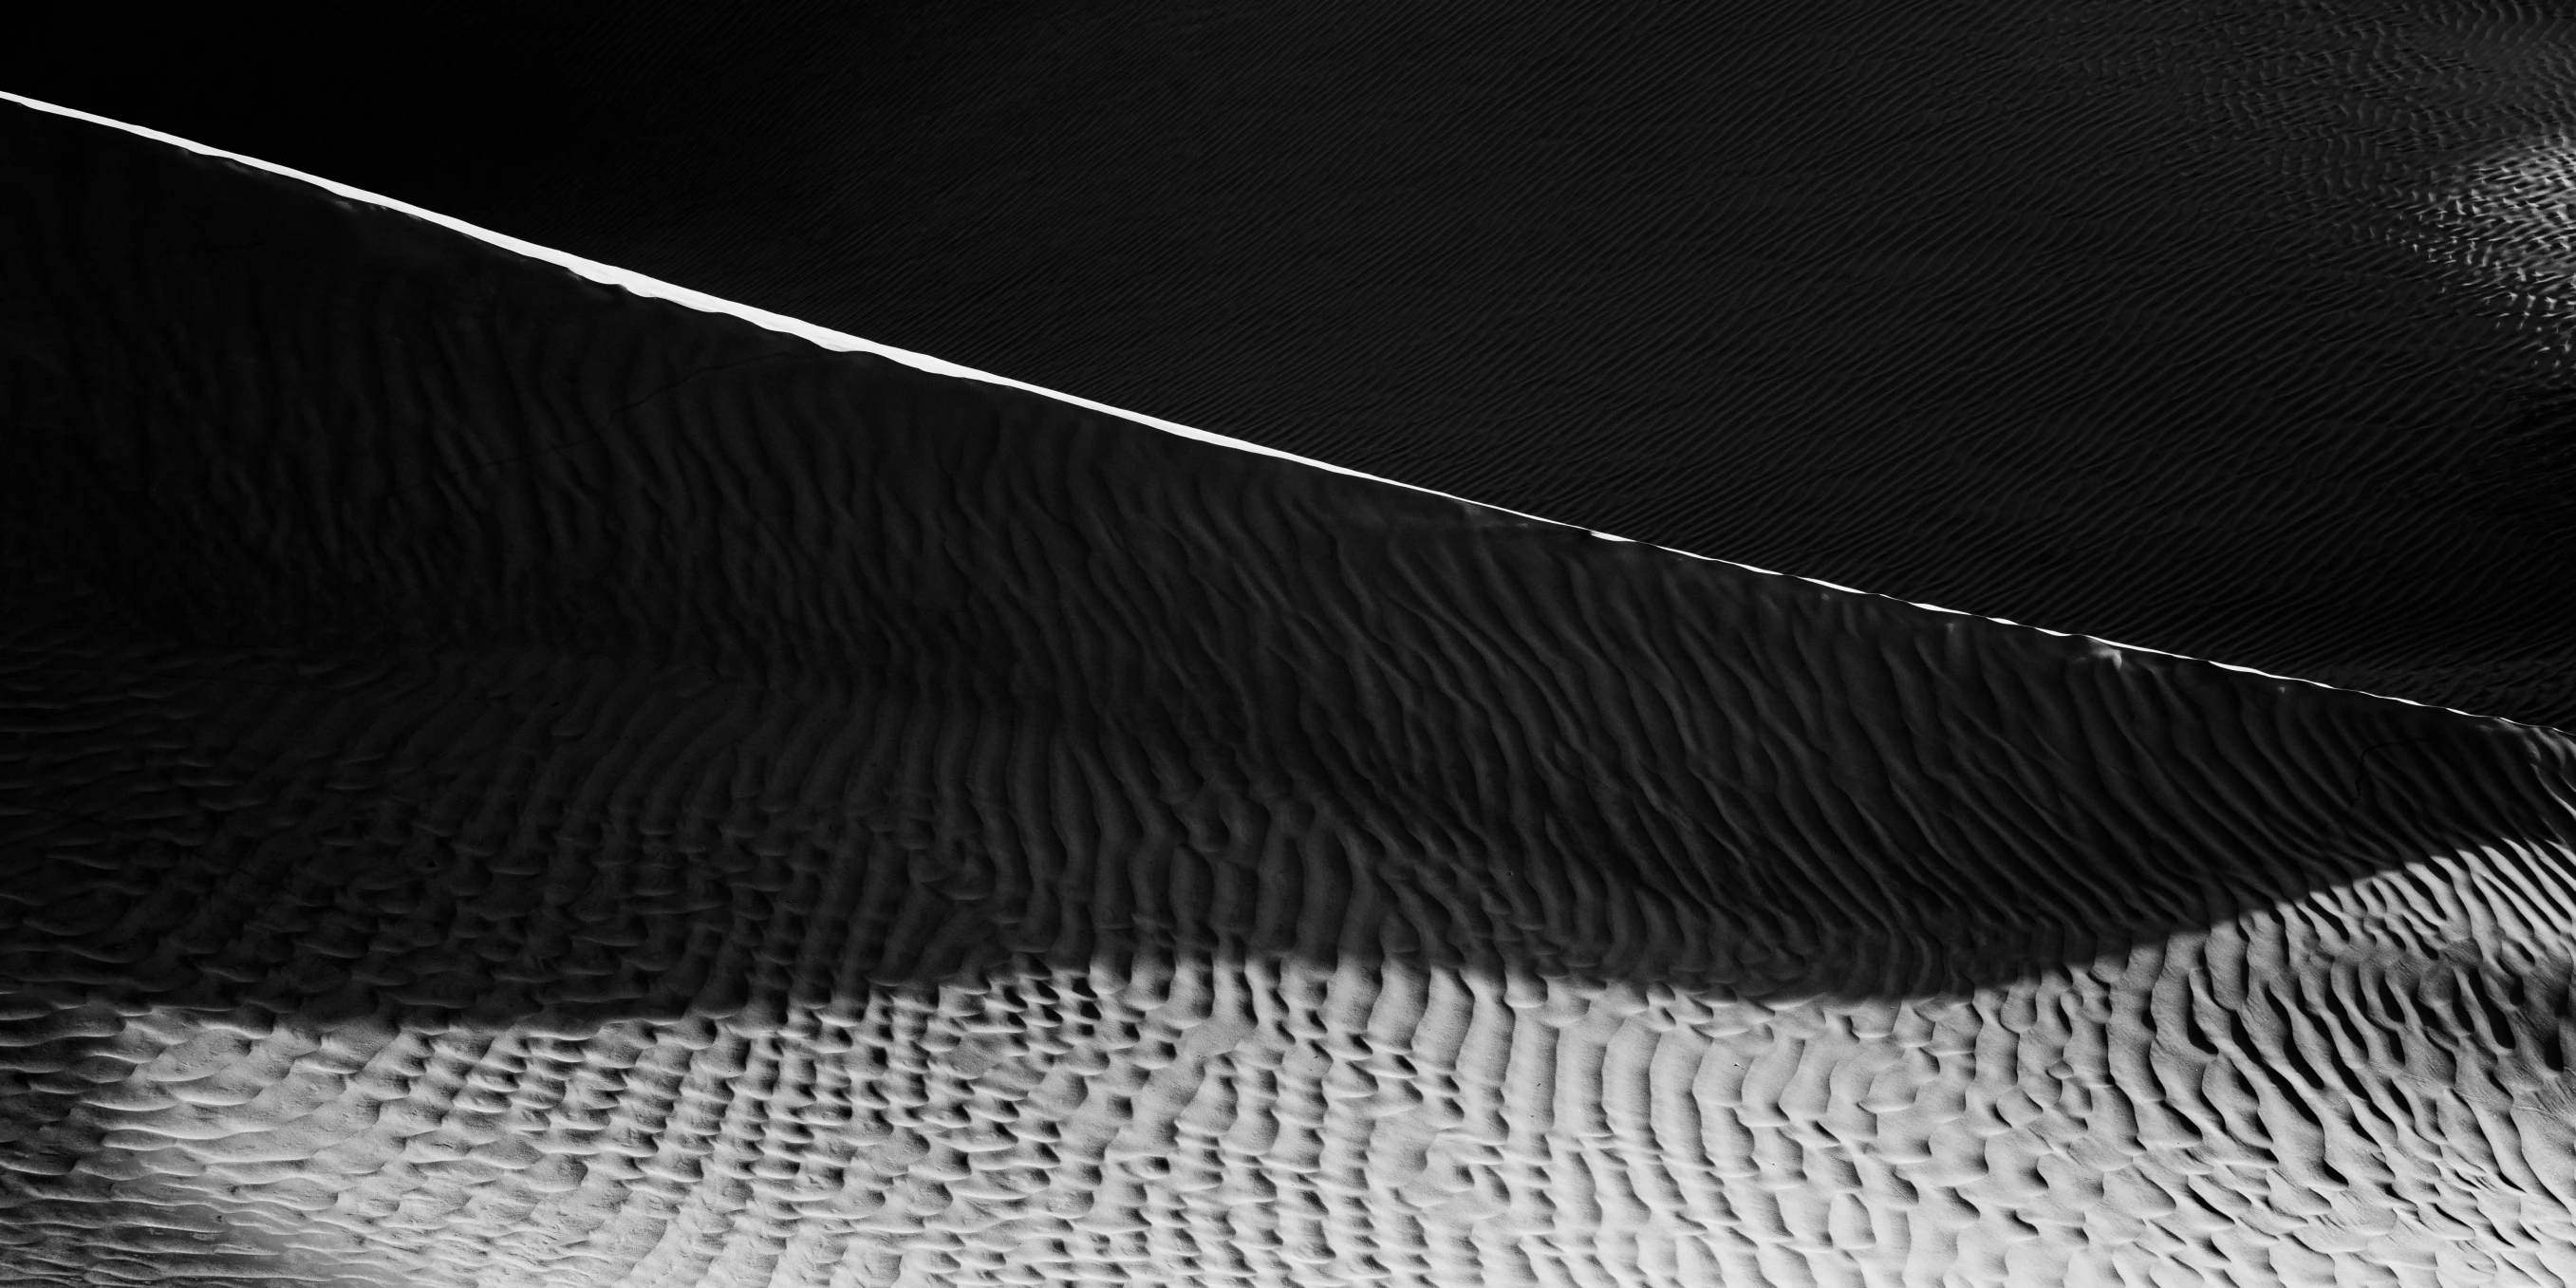 the dark and white pograph shows texture of sand and water